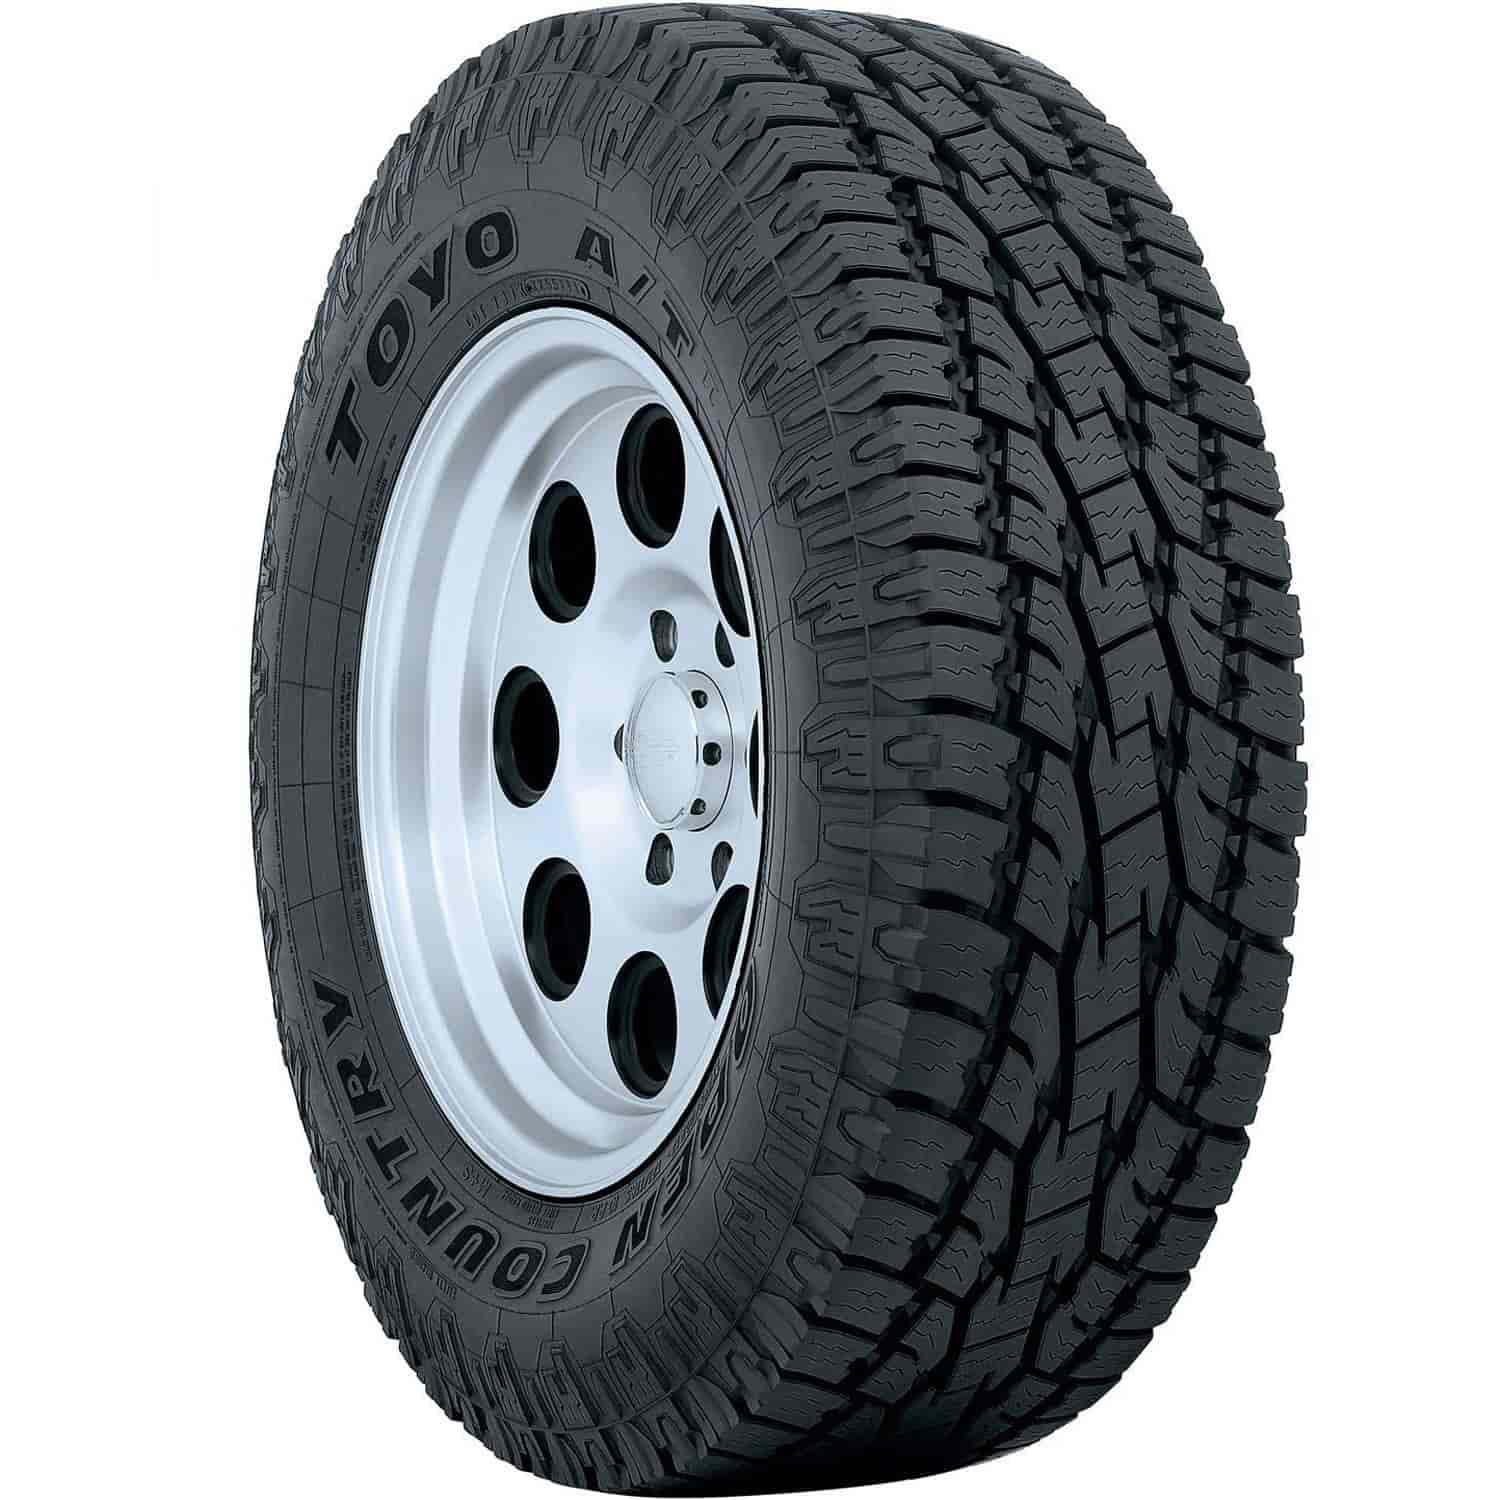 OPEN COUNTRY A/T II LT325/60R20 126R E/10